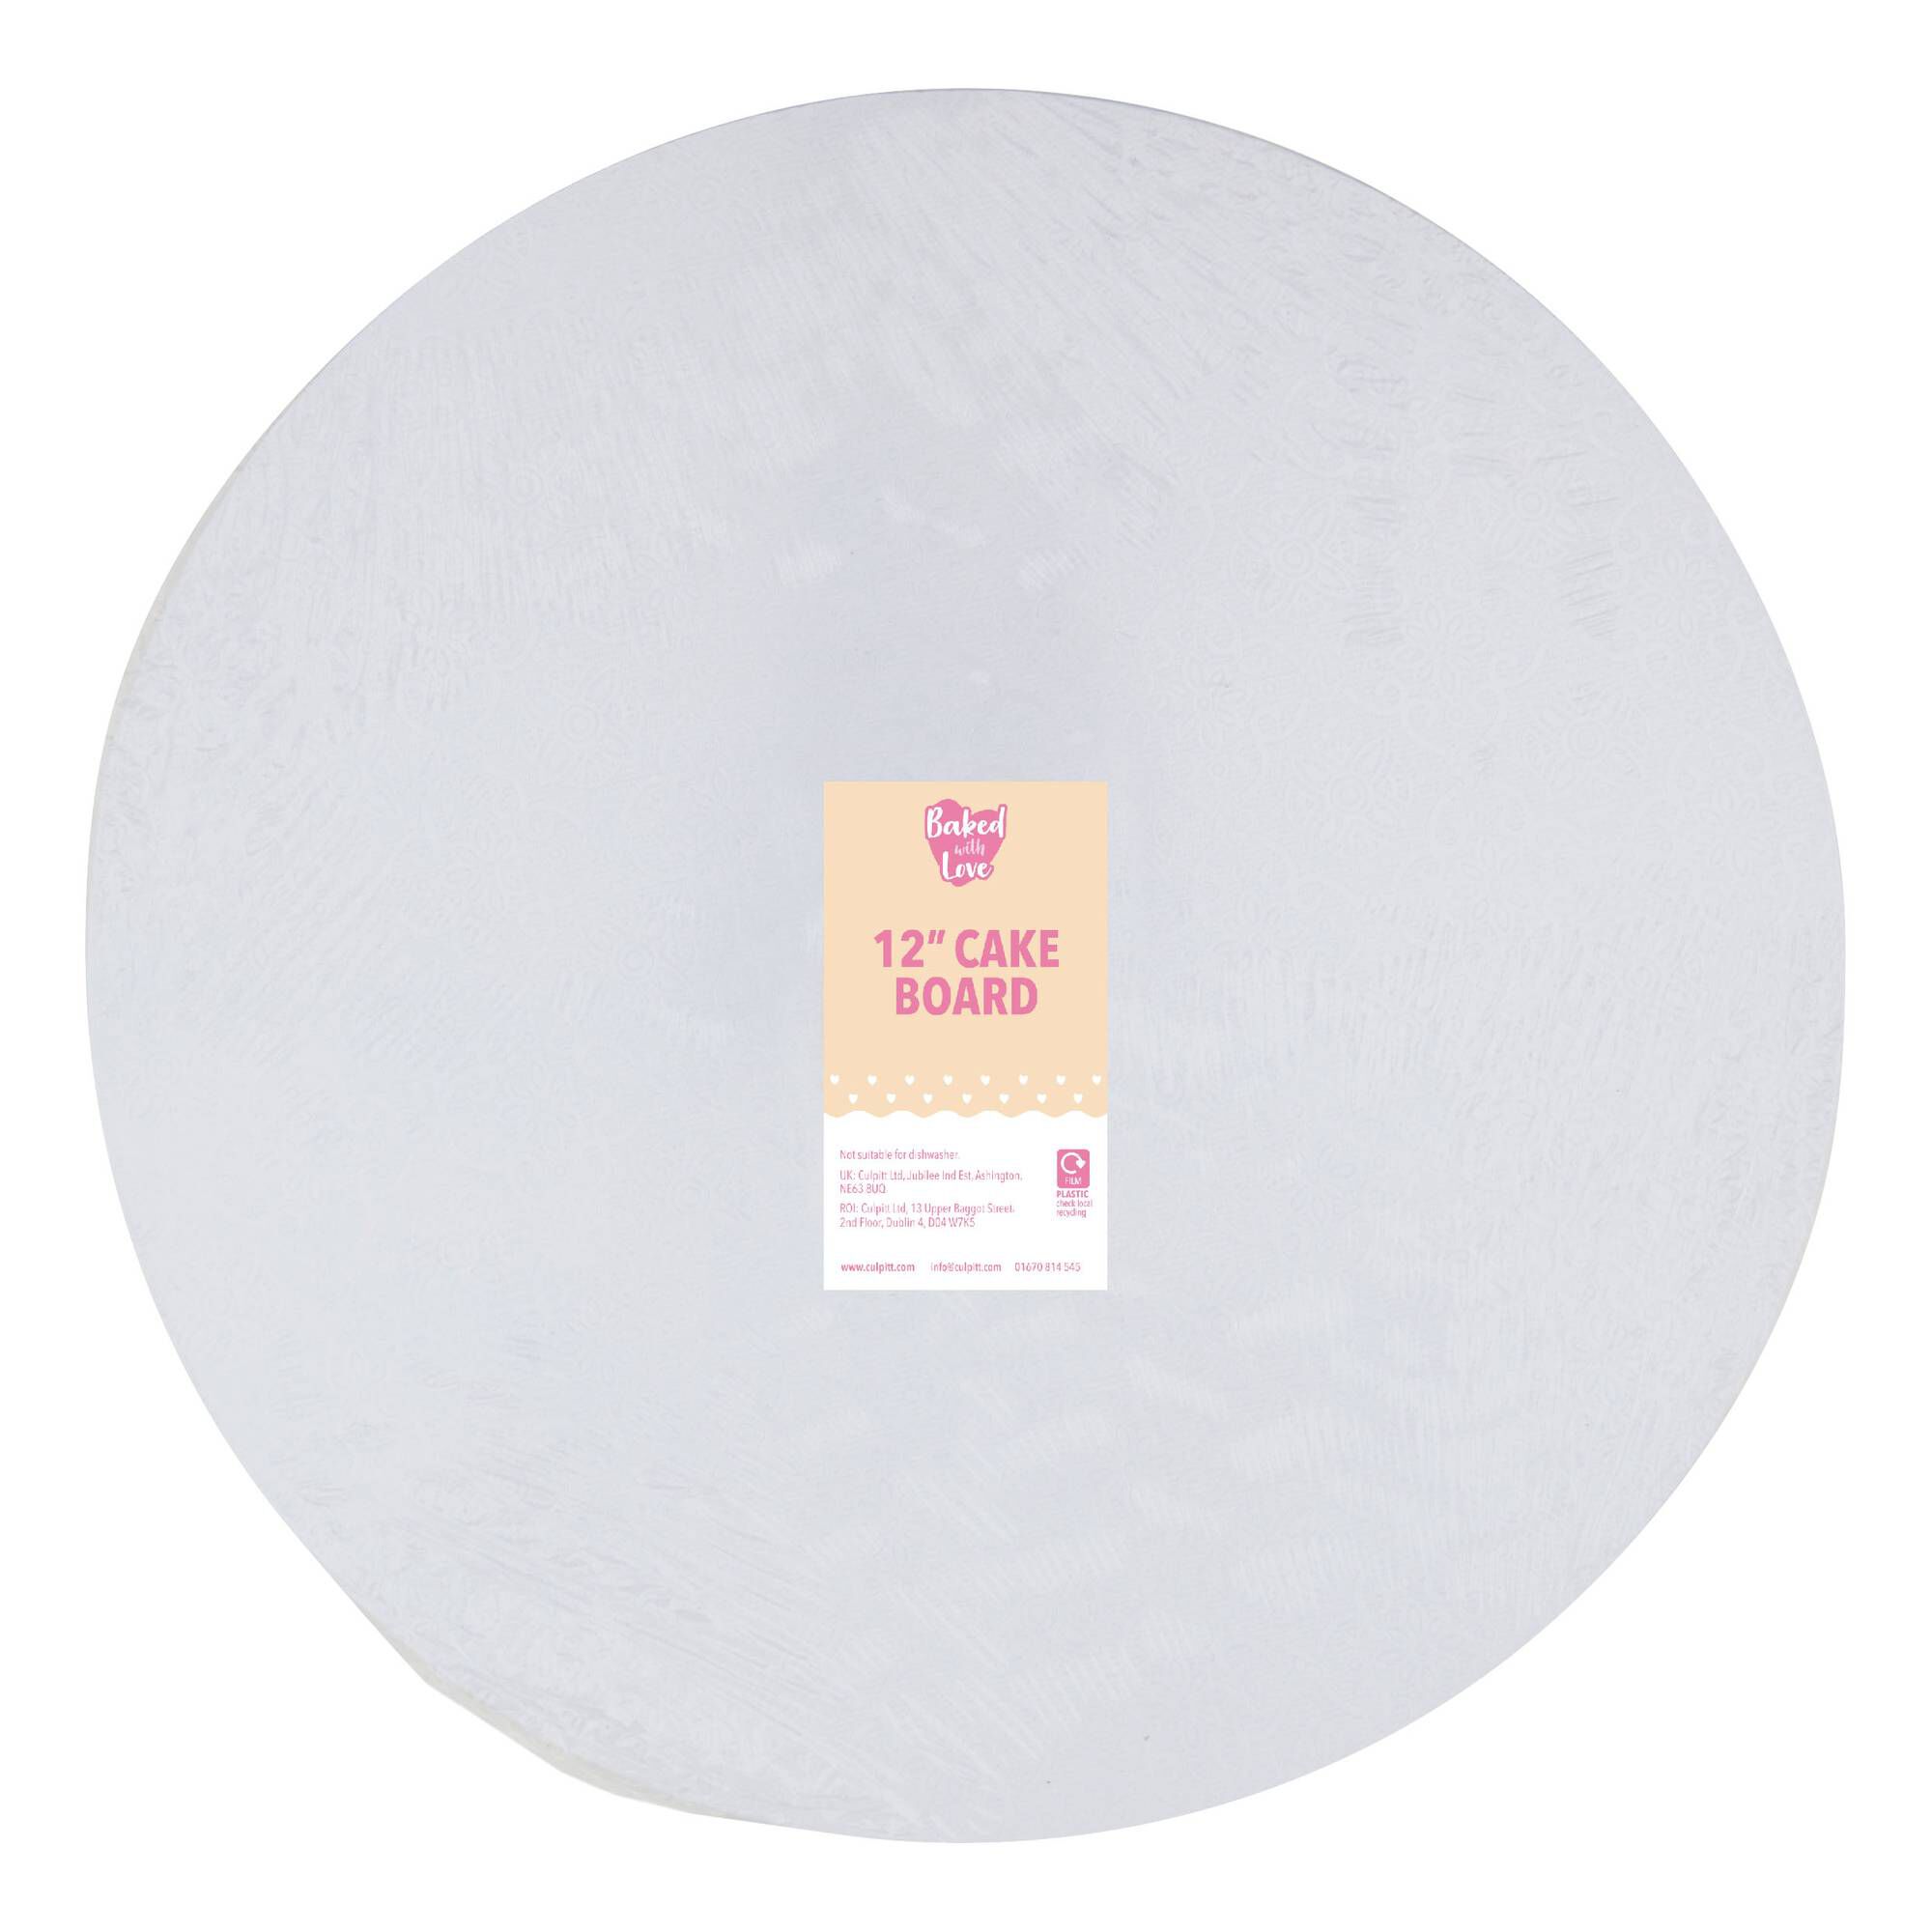 Baked With Love White Round Double Thick Cake Board 12 Inches Hobbycraft